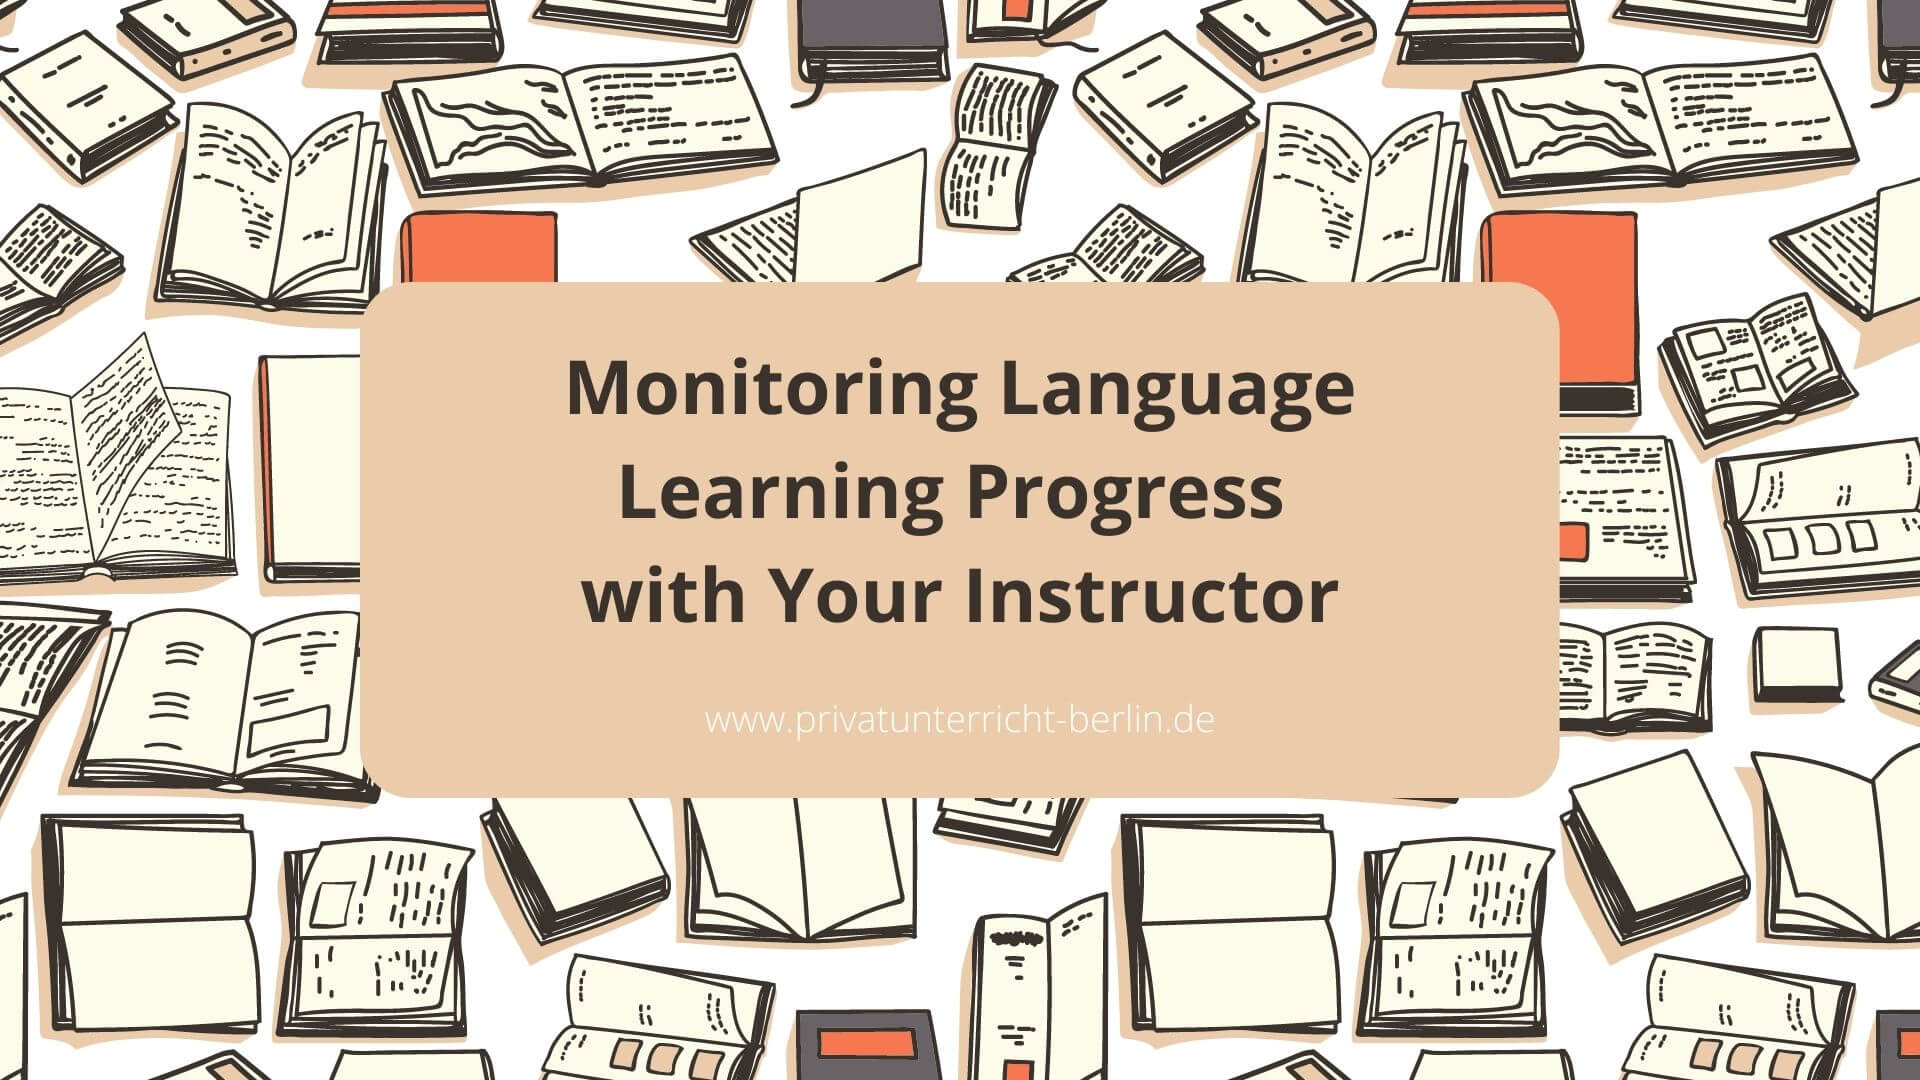 Monitoring Language Learning Progress With Your Instructor